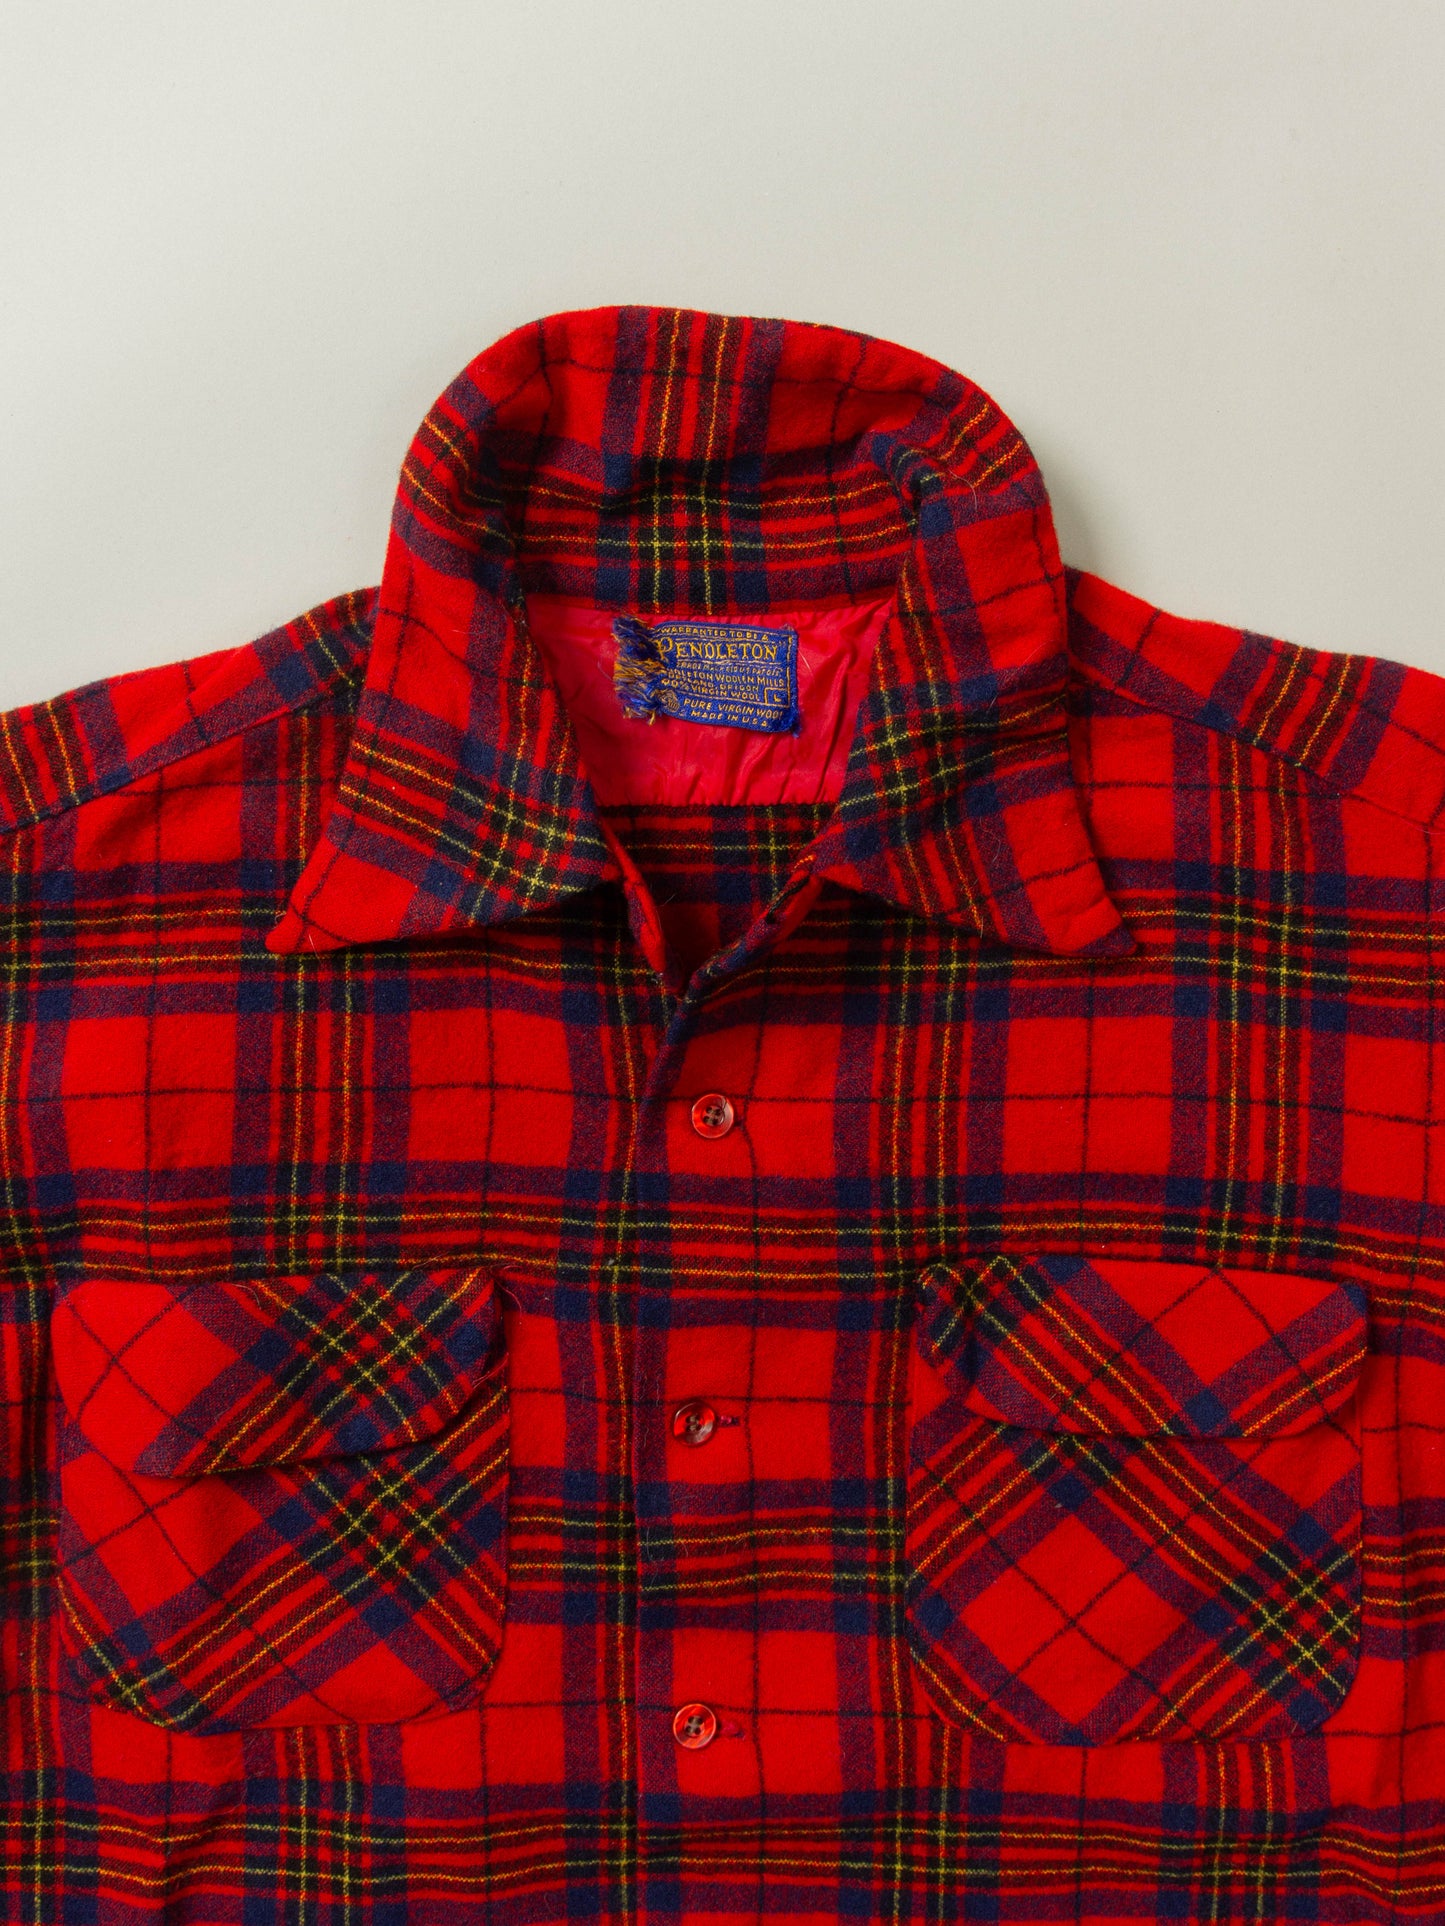 Vtg 1970s Pendleton Plaid Wool Flannel Shirt - Made in USA (S)